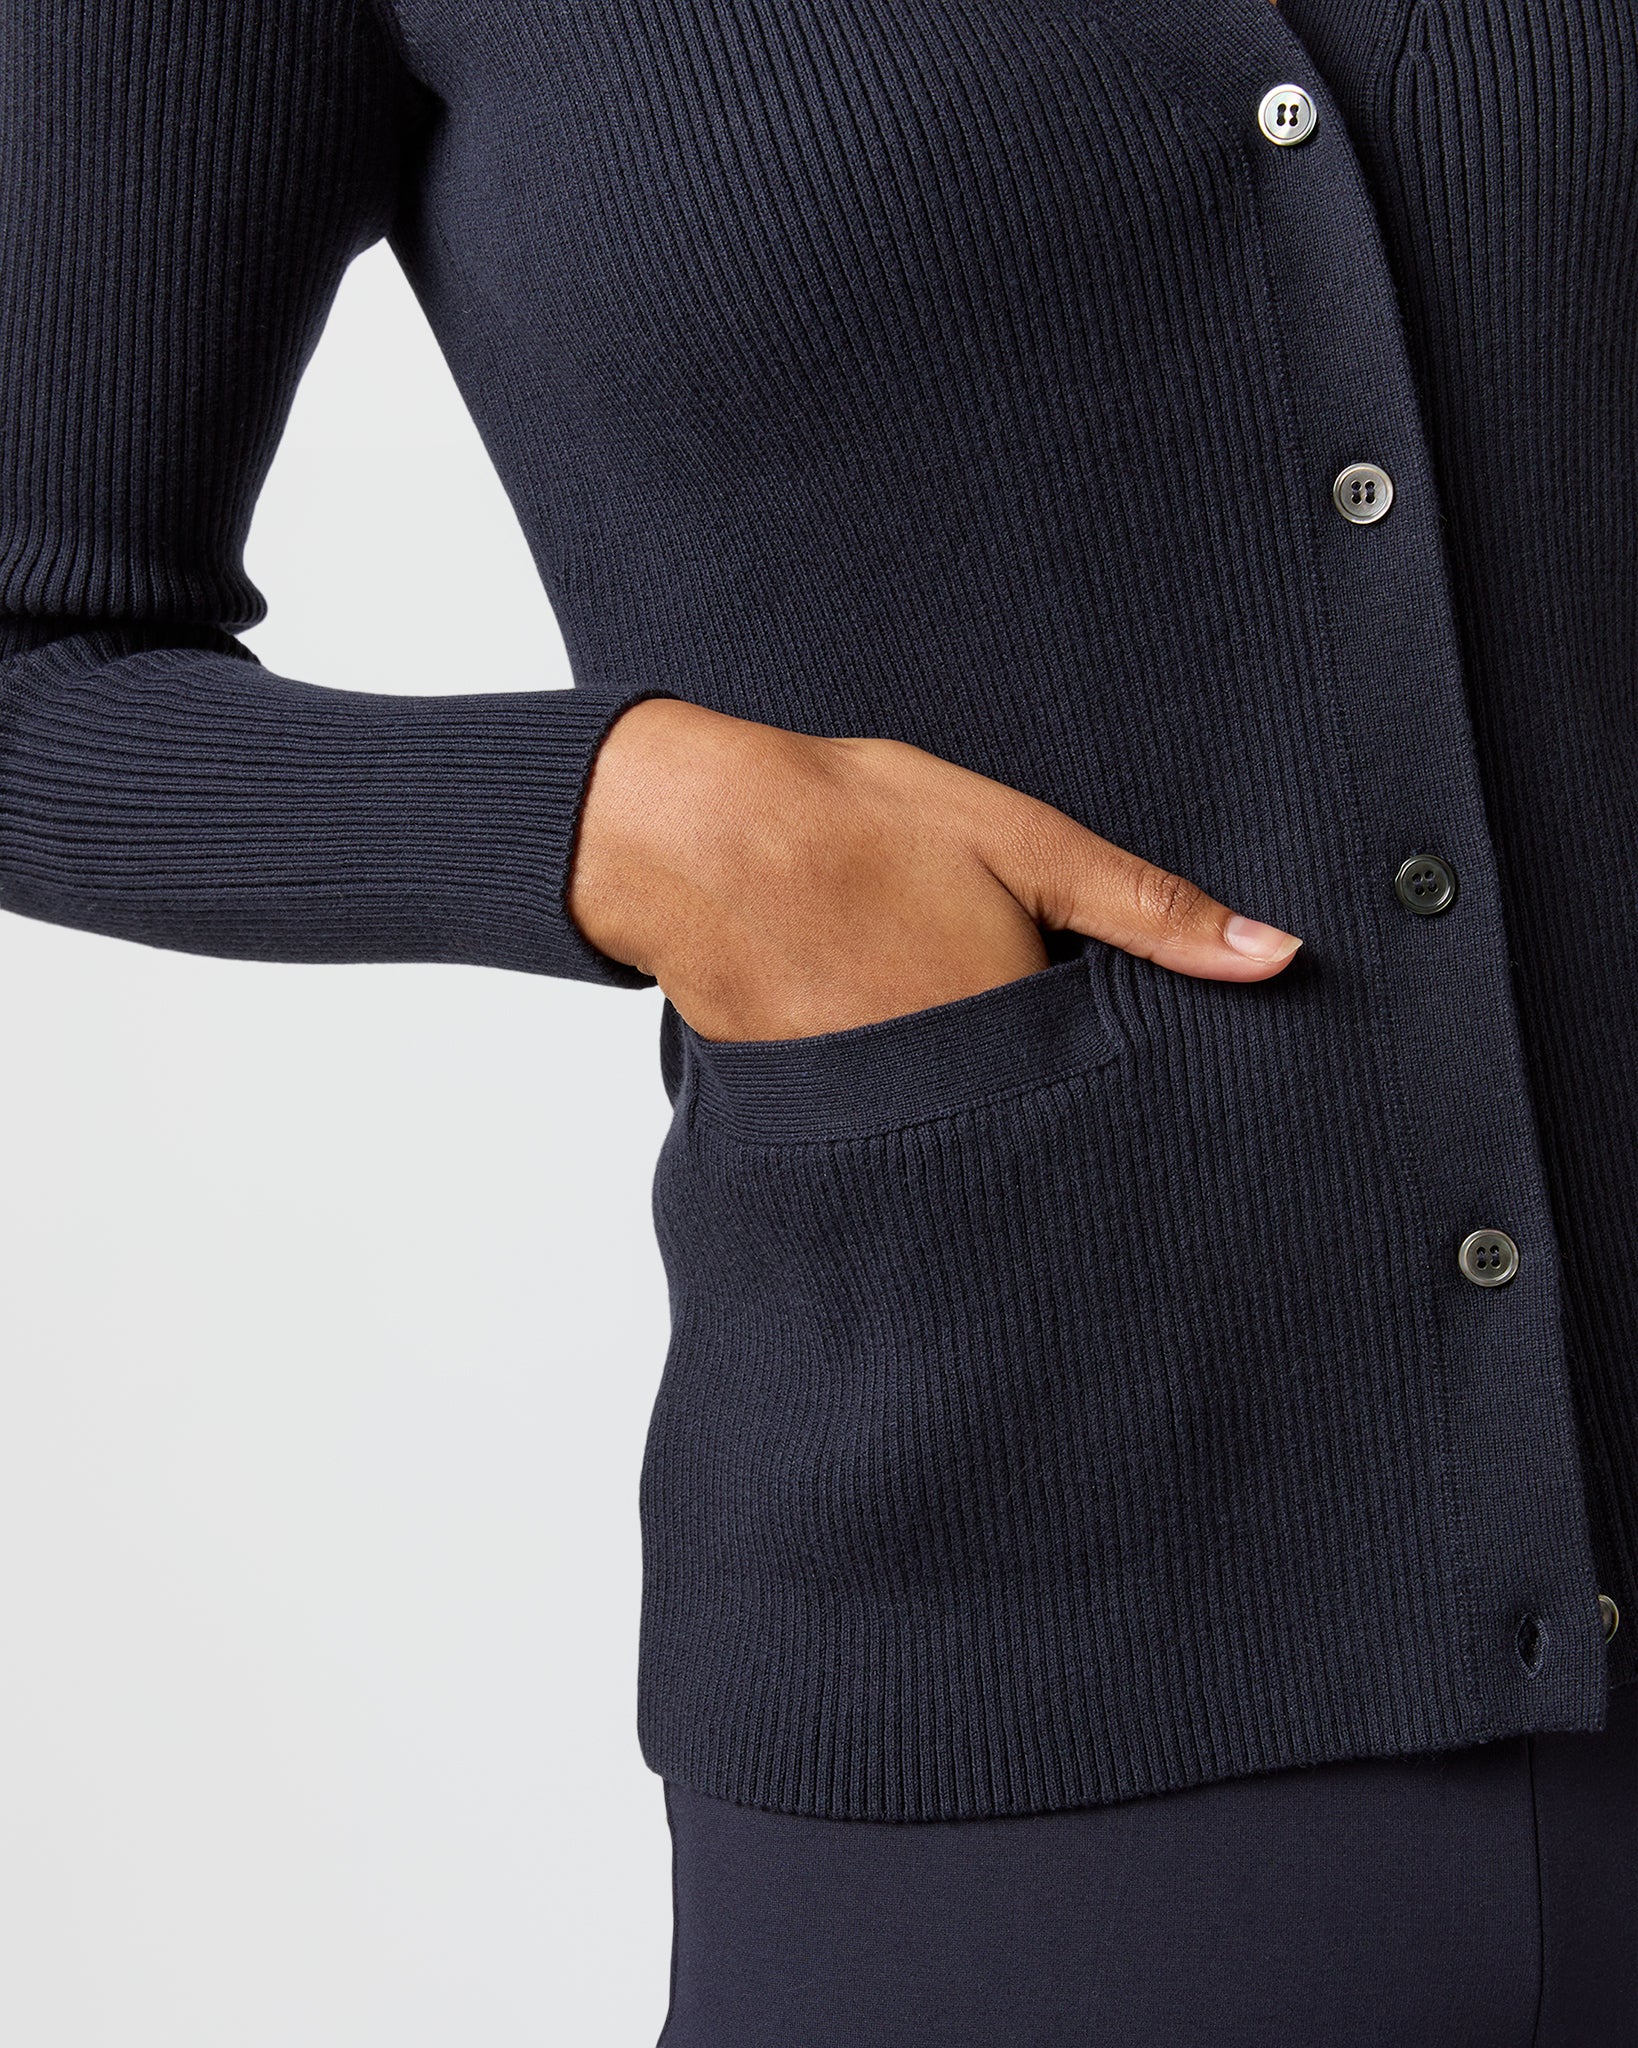 Nia Long-Sleeved Ribbed Cardigan in Navy Cotton/Silk